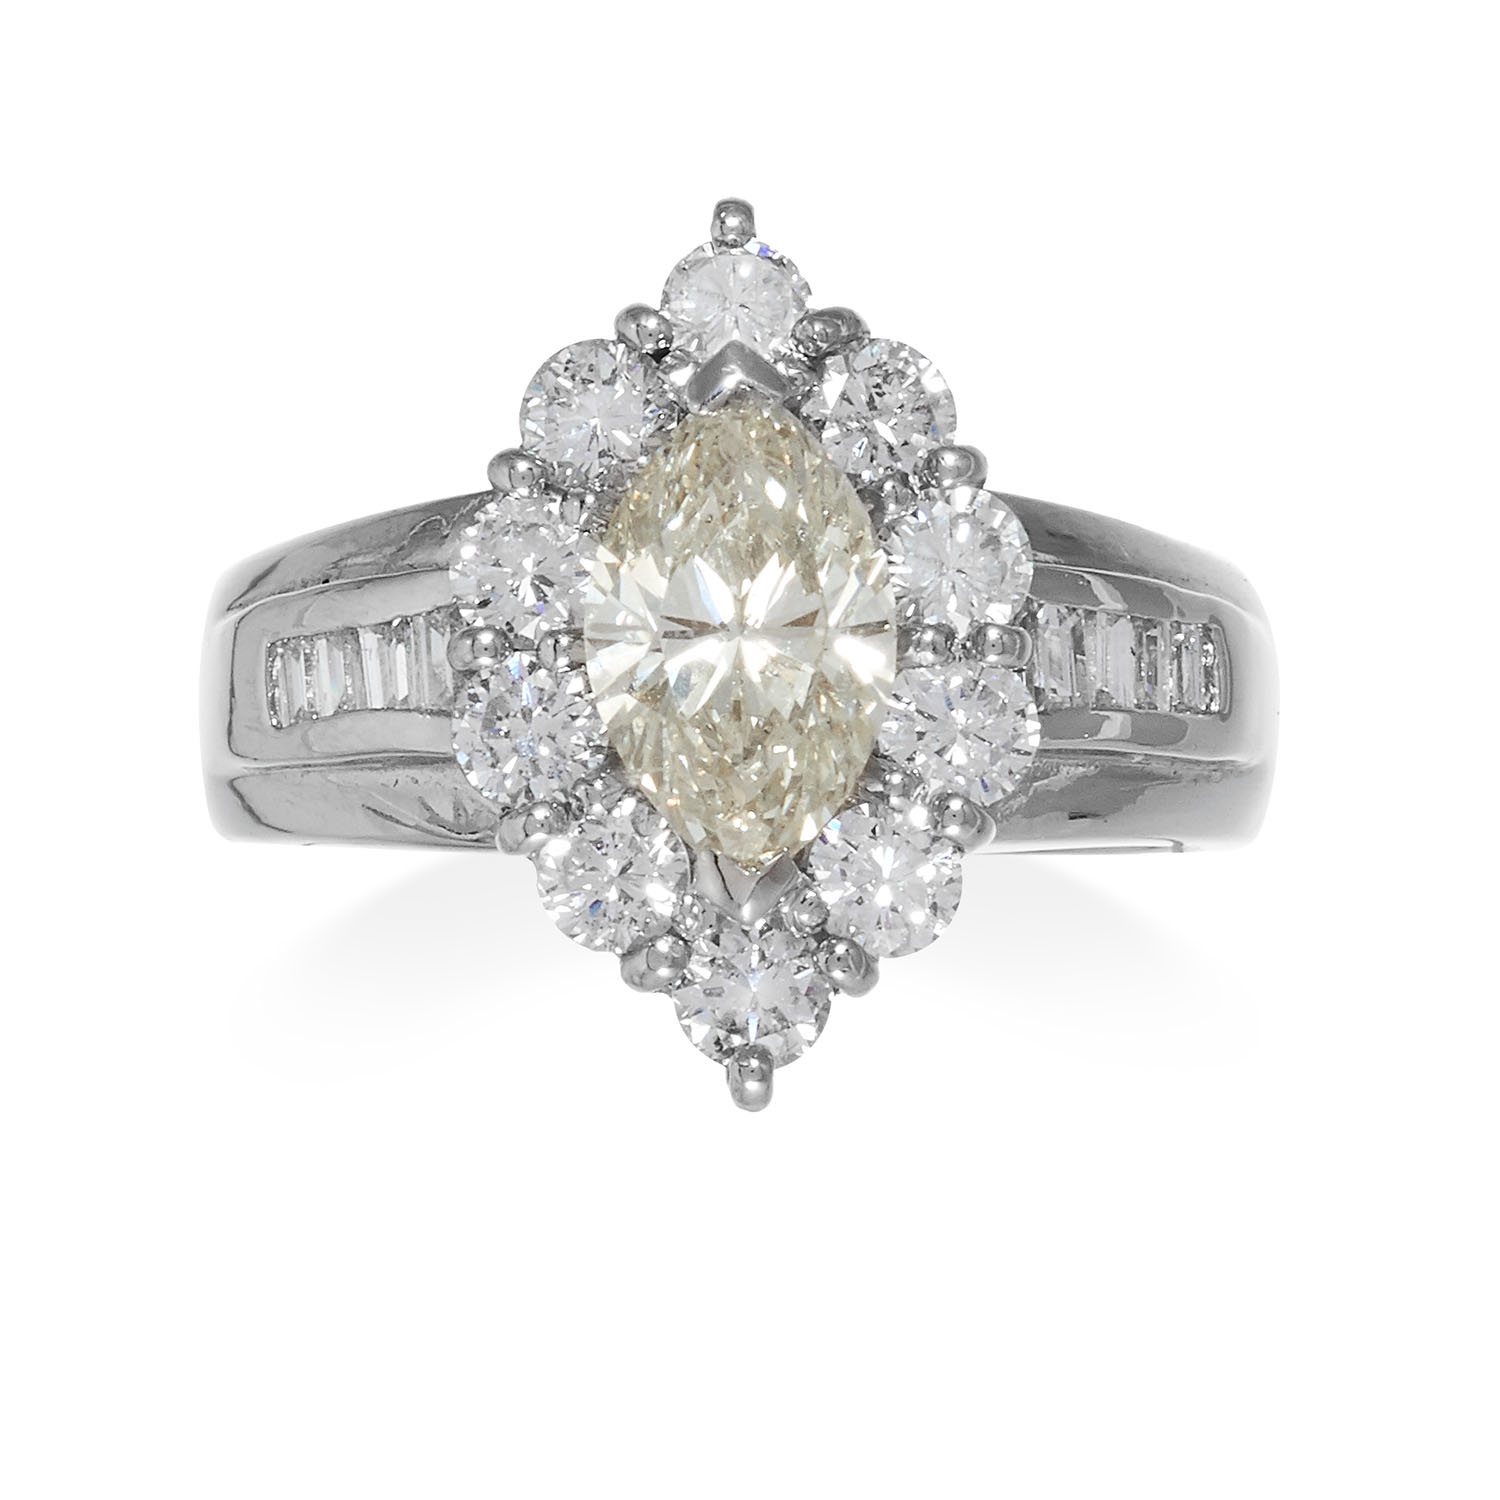 A DIAMOND DRESS RING in platinum, comprising of a marquise cut diamond framed by a border of round